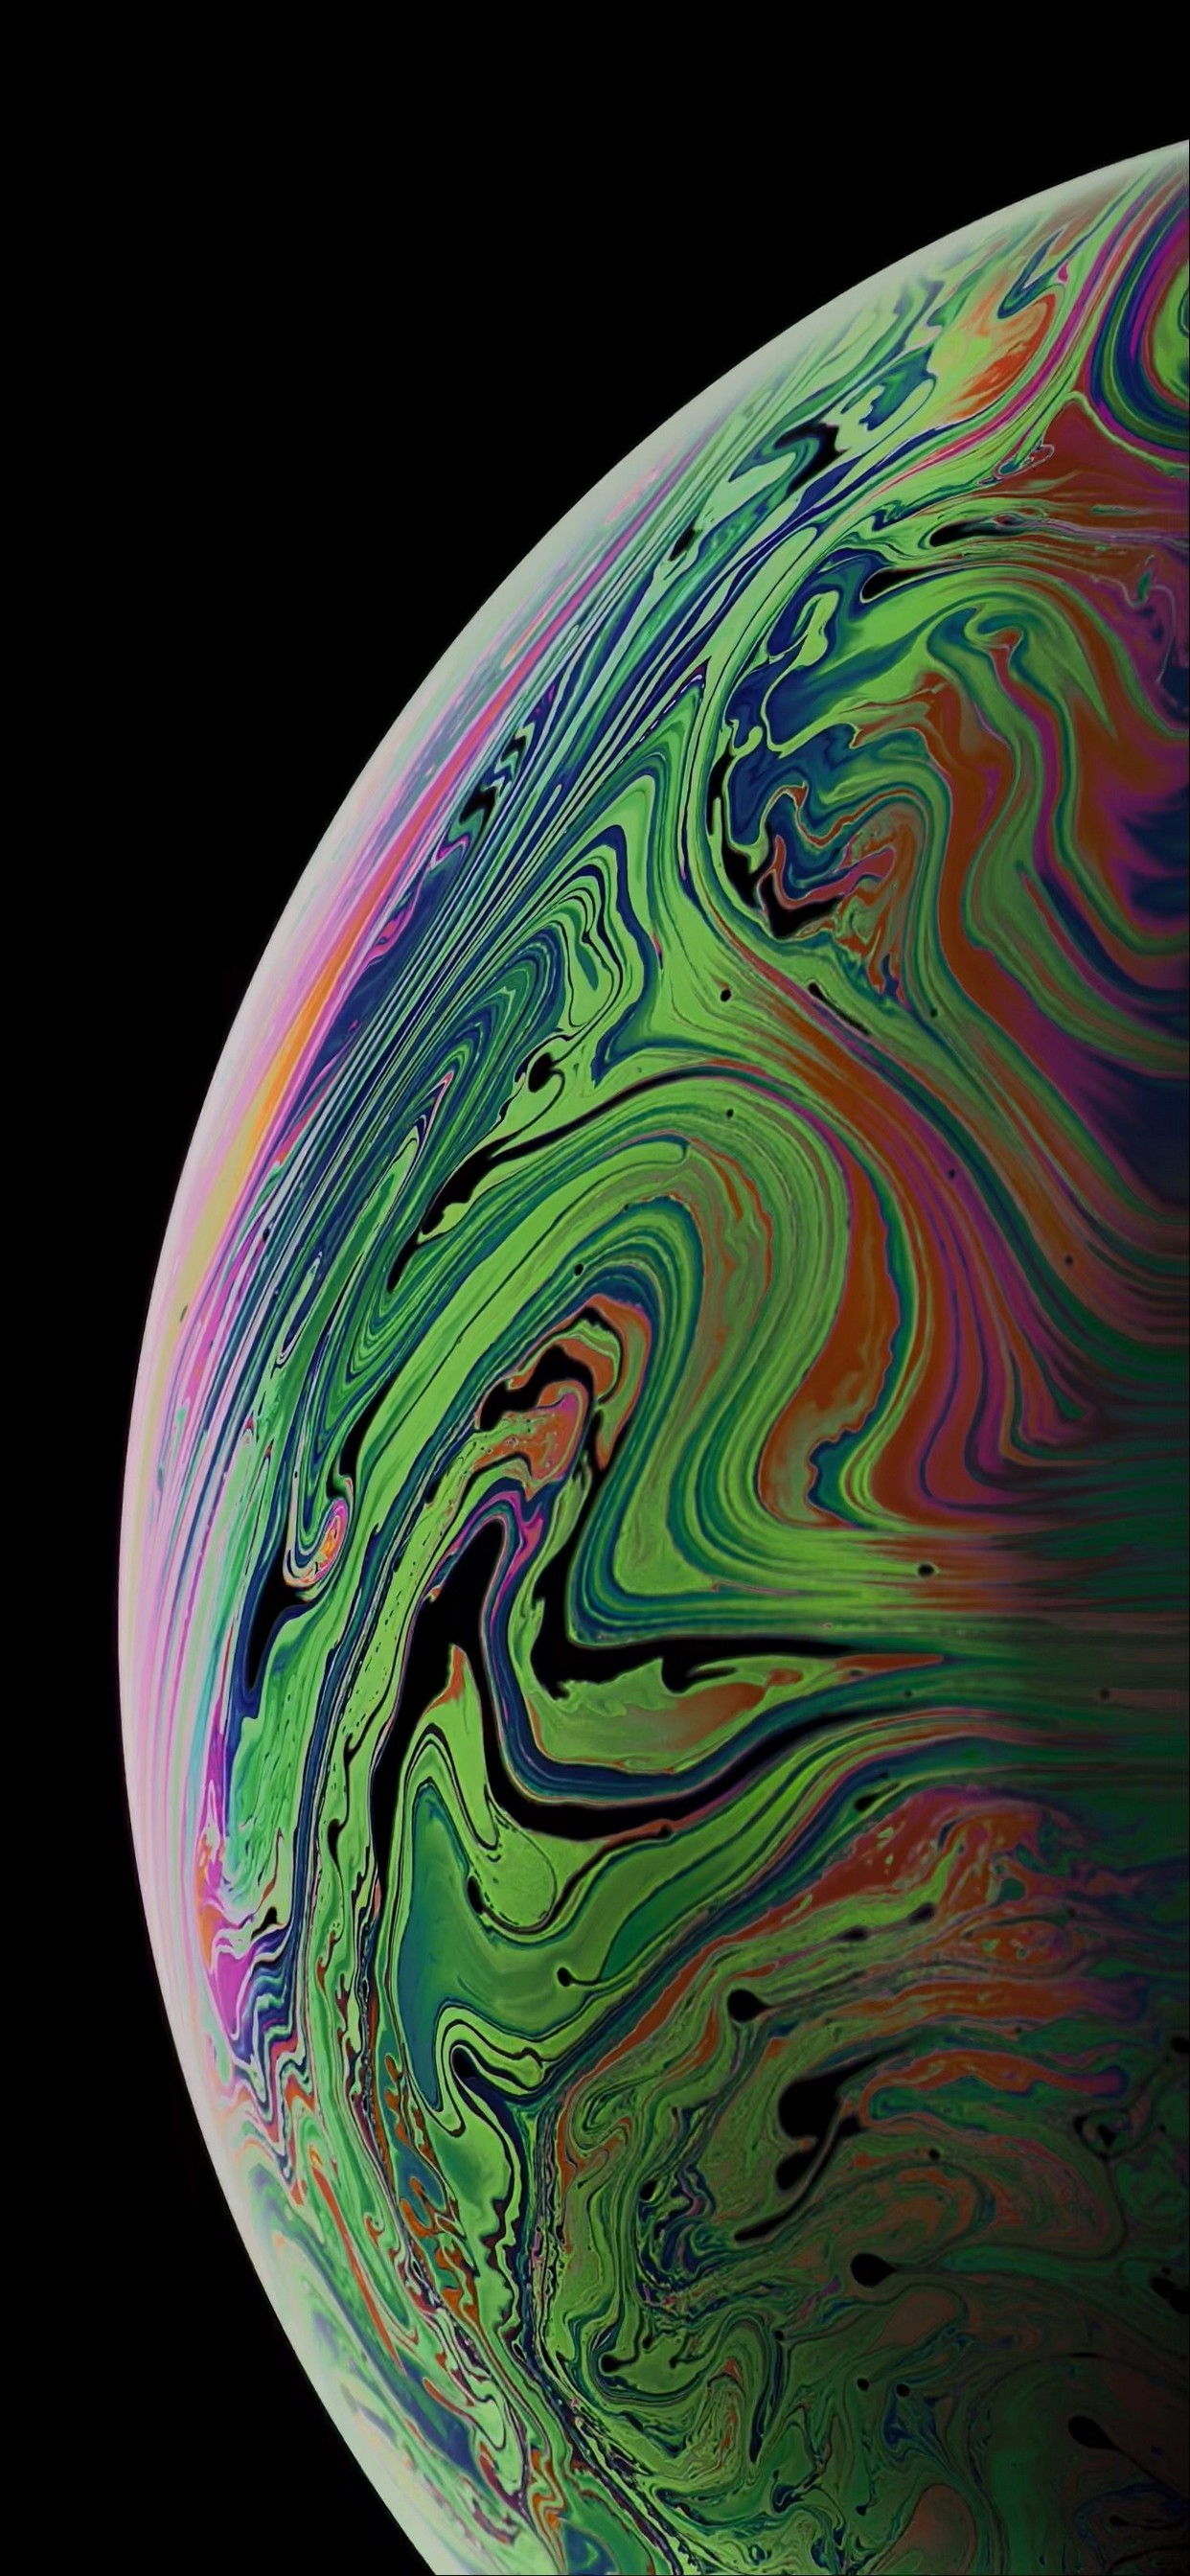 Iphone Xs Max Wallpaper New With High-resolution Pixel - HD Wallpaper 